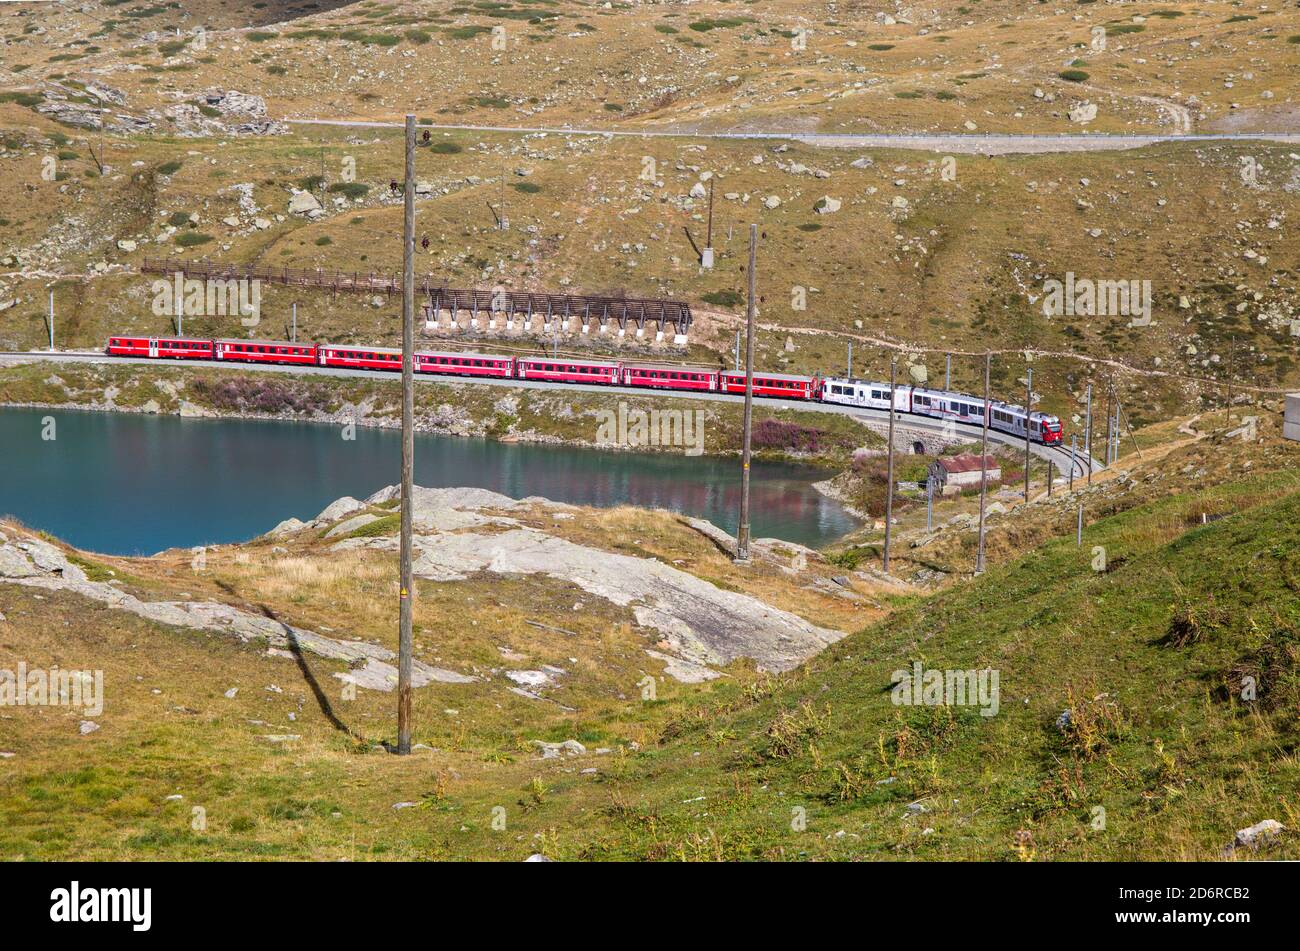 The typical red Bernina Express train at Bernina Pass between Italy and Switzerland in summertime. Stock Photo